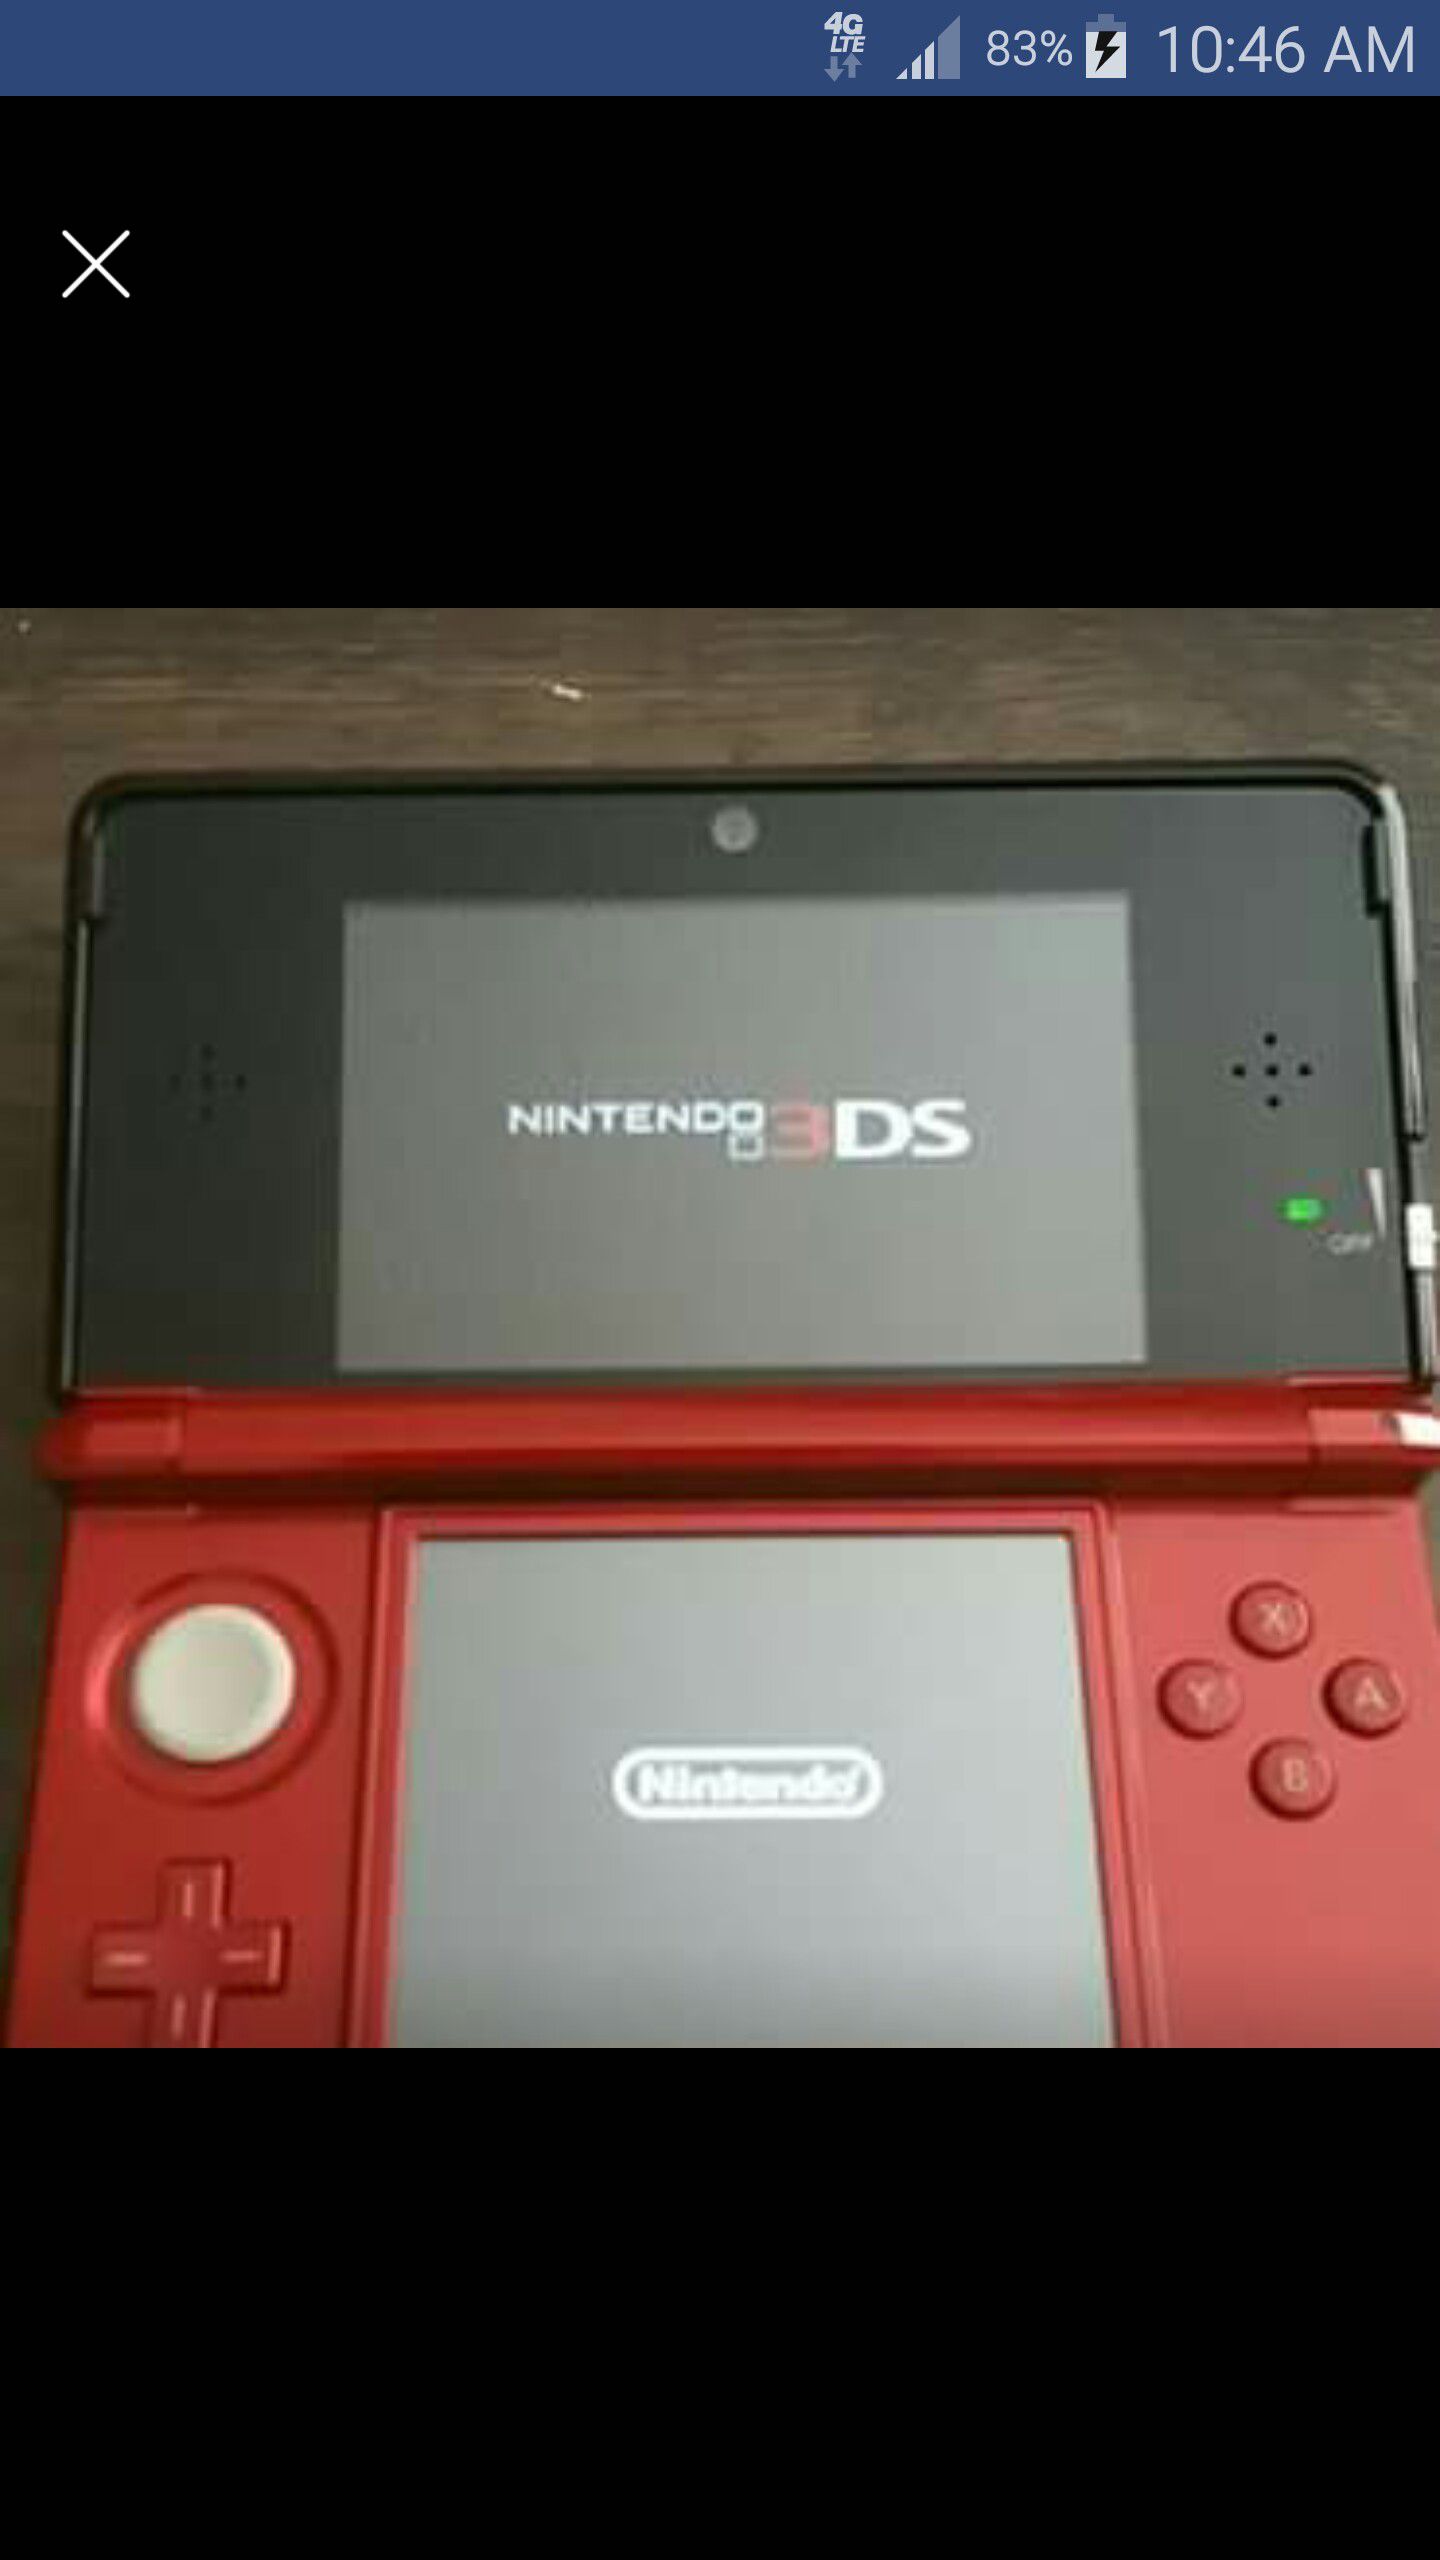 Nintendo 3DS (Red) Game/Accessories Bundle